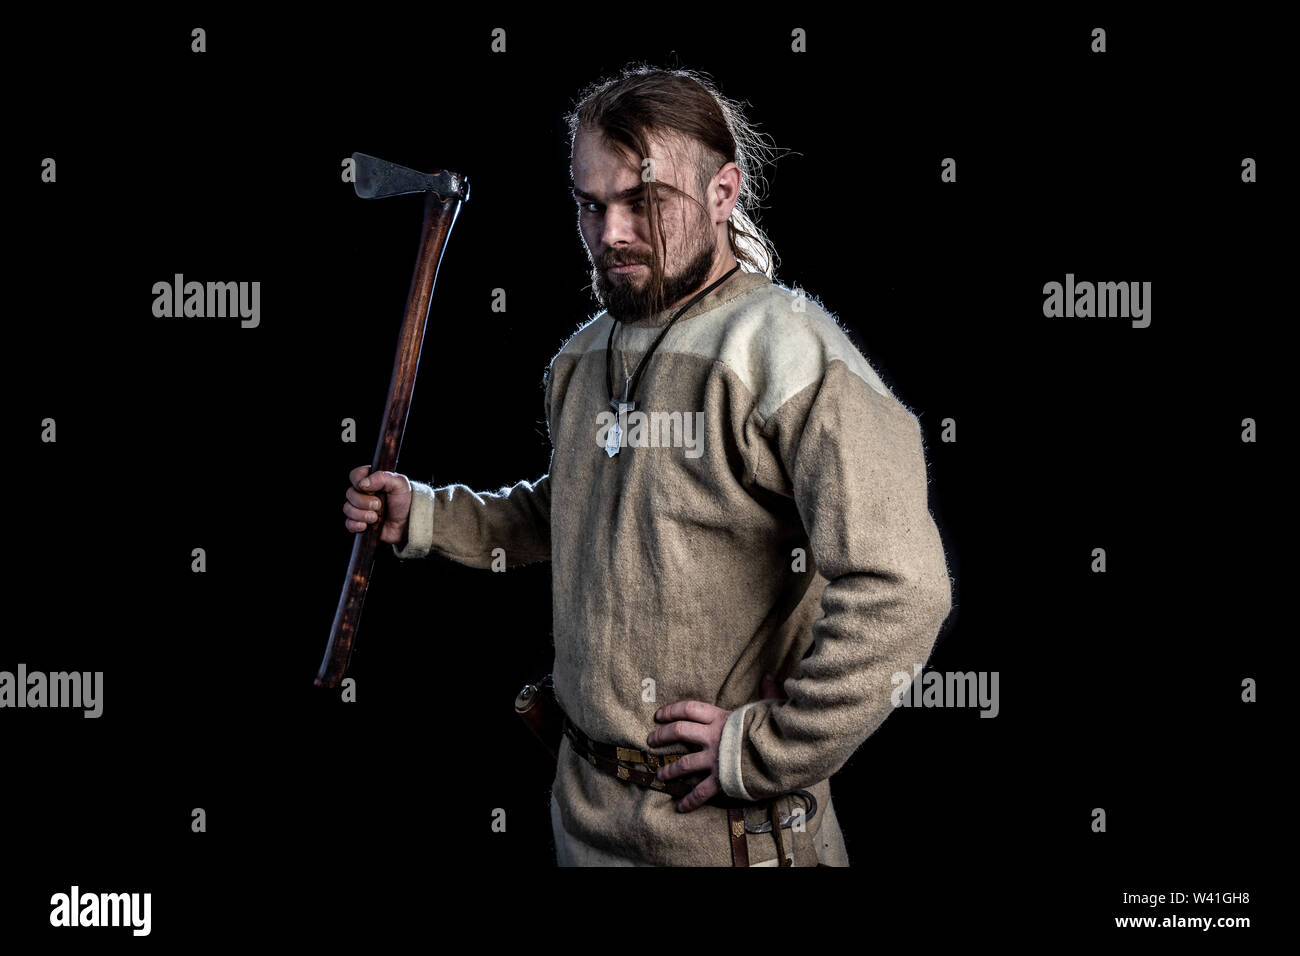 man in the clothes of the Viking Age with axe Stock Photo